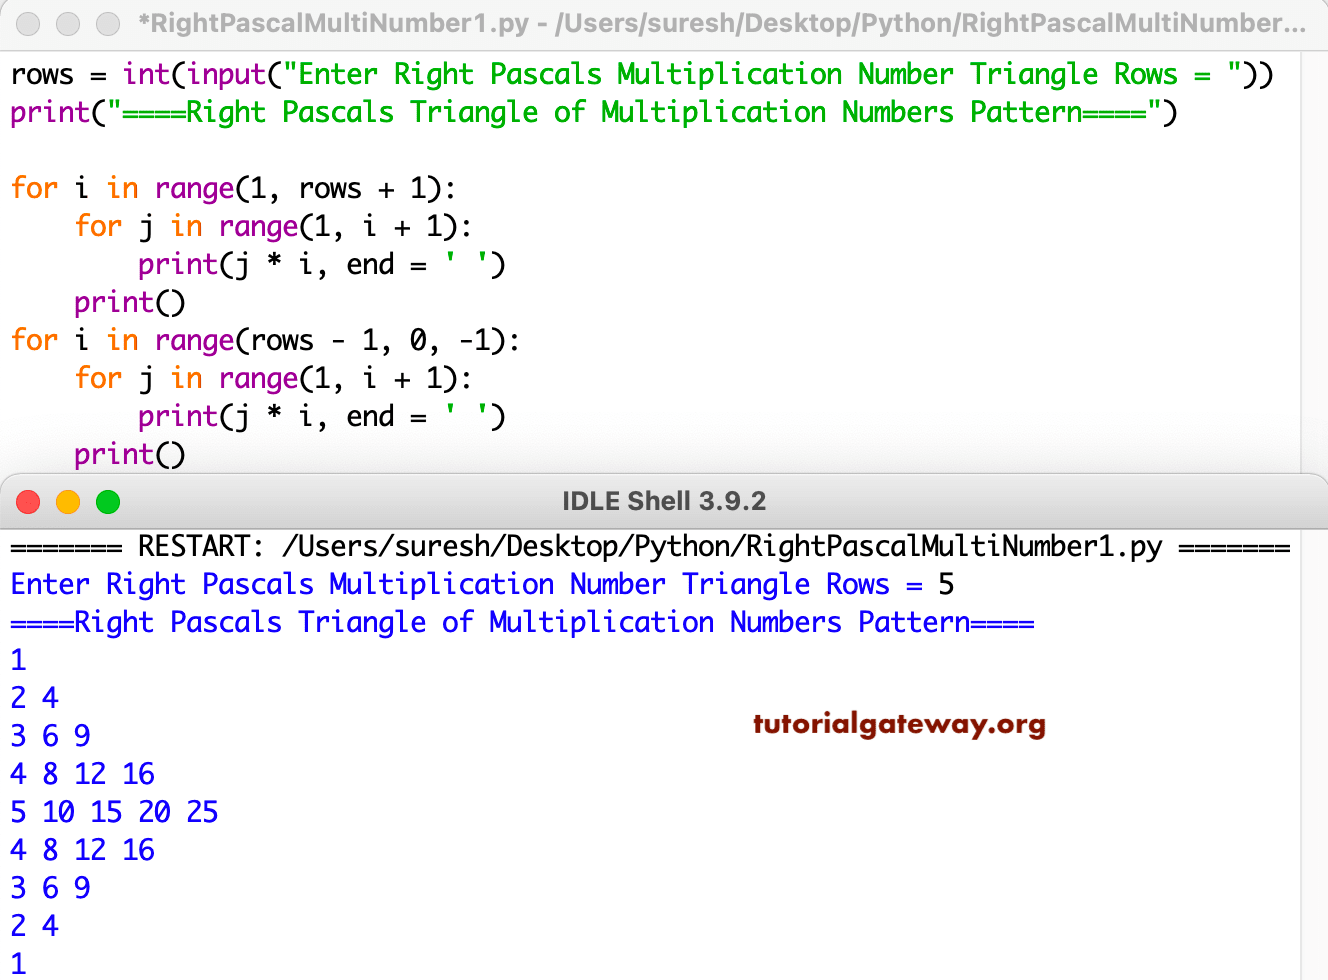 Python Program to Print Right Pascals Triangle of Multiplication Numbers Pattern